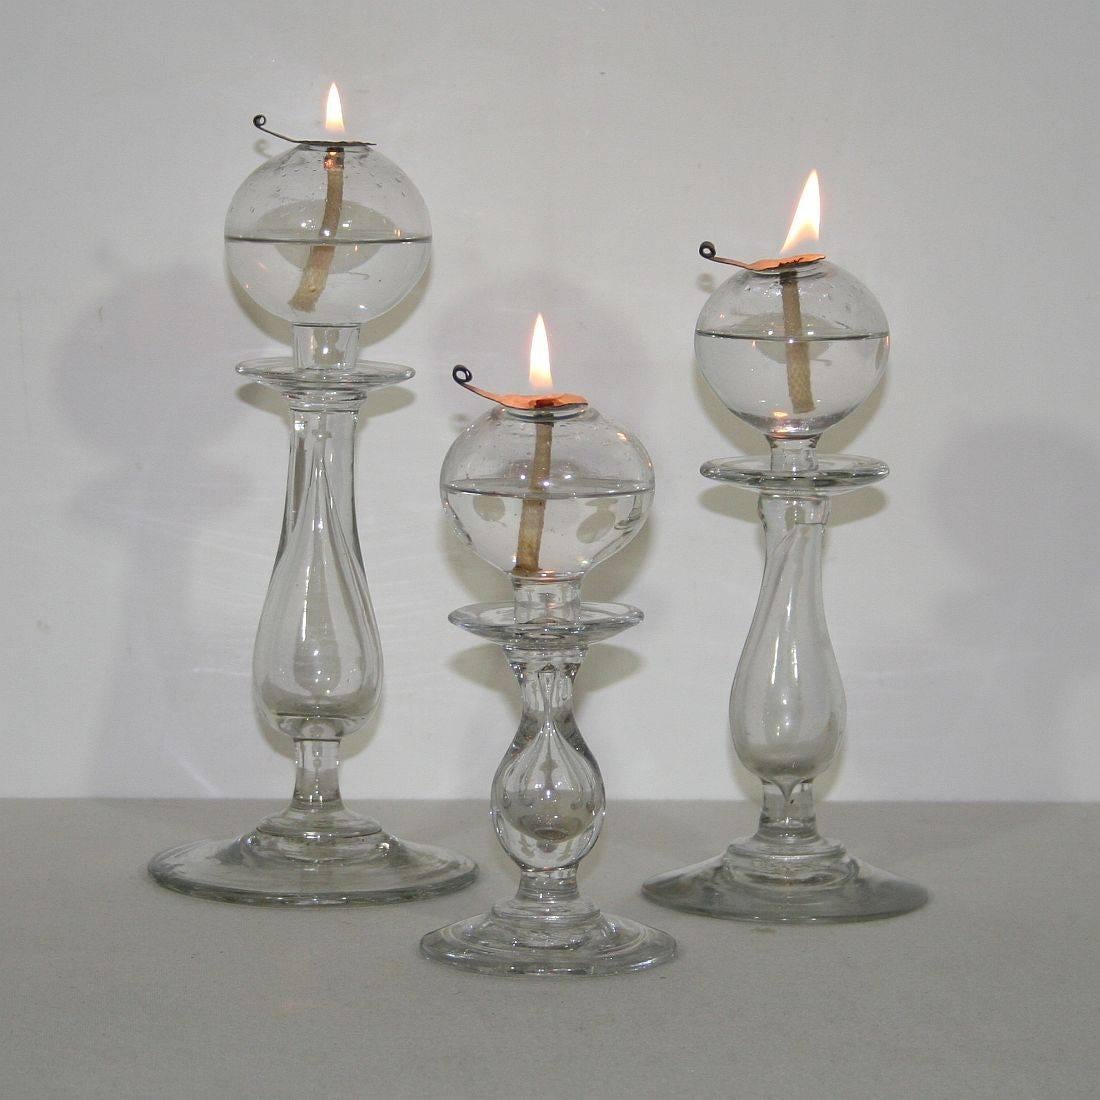 Rare collection of three handblown glass weaver oil lamps from the south of France, France, circa 1800-1900
Very good condition. More pictures available on request.
Measures: H 18-26cm (7-10,25 in) W 8-11.5 cm (3-4.5 in) D 8-11.5 cm (3-4.5 in)